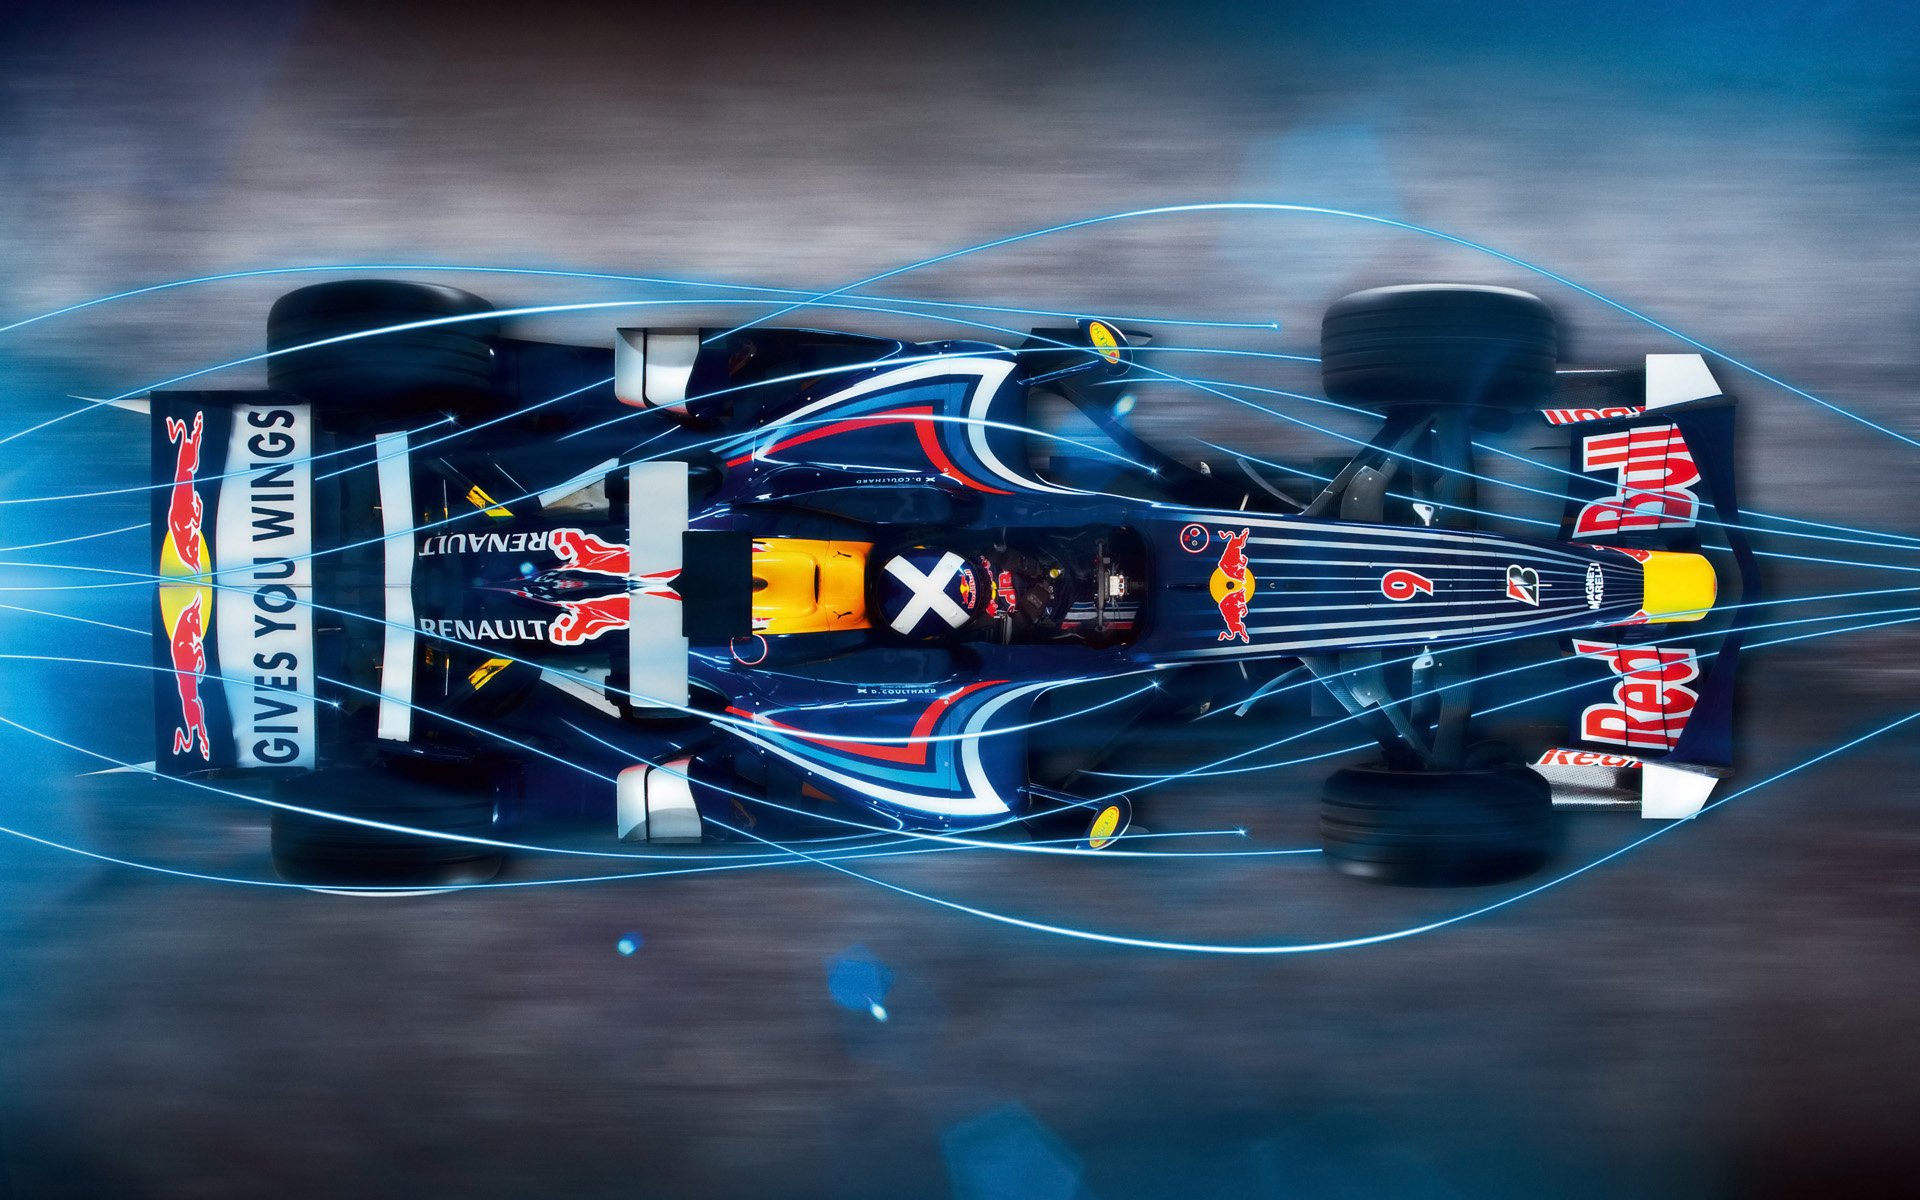 Red Bull Racing Hd Wallpapers And Backgrounds